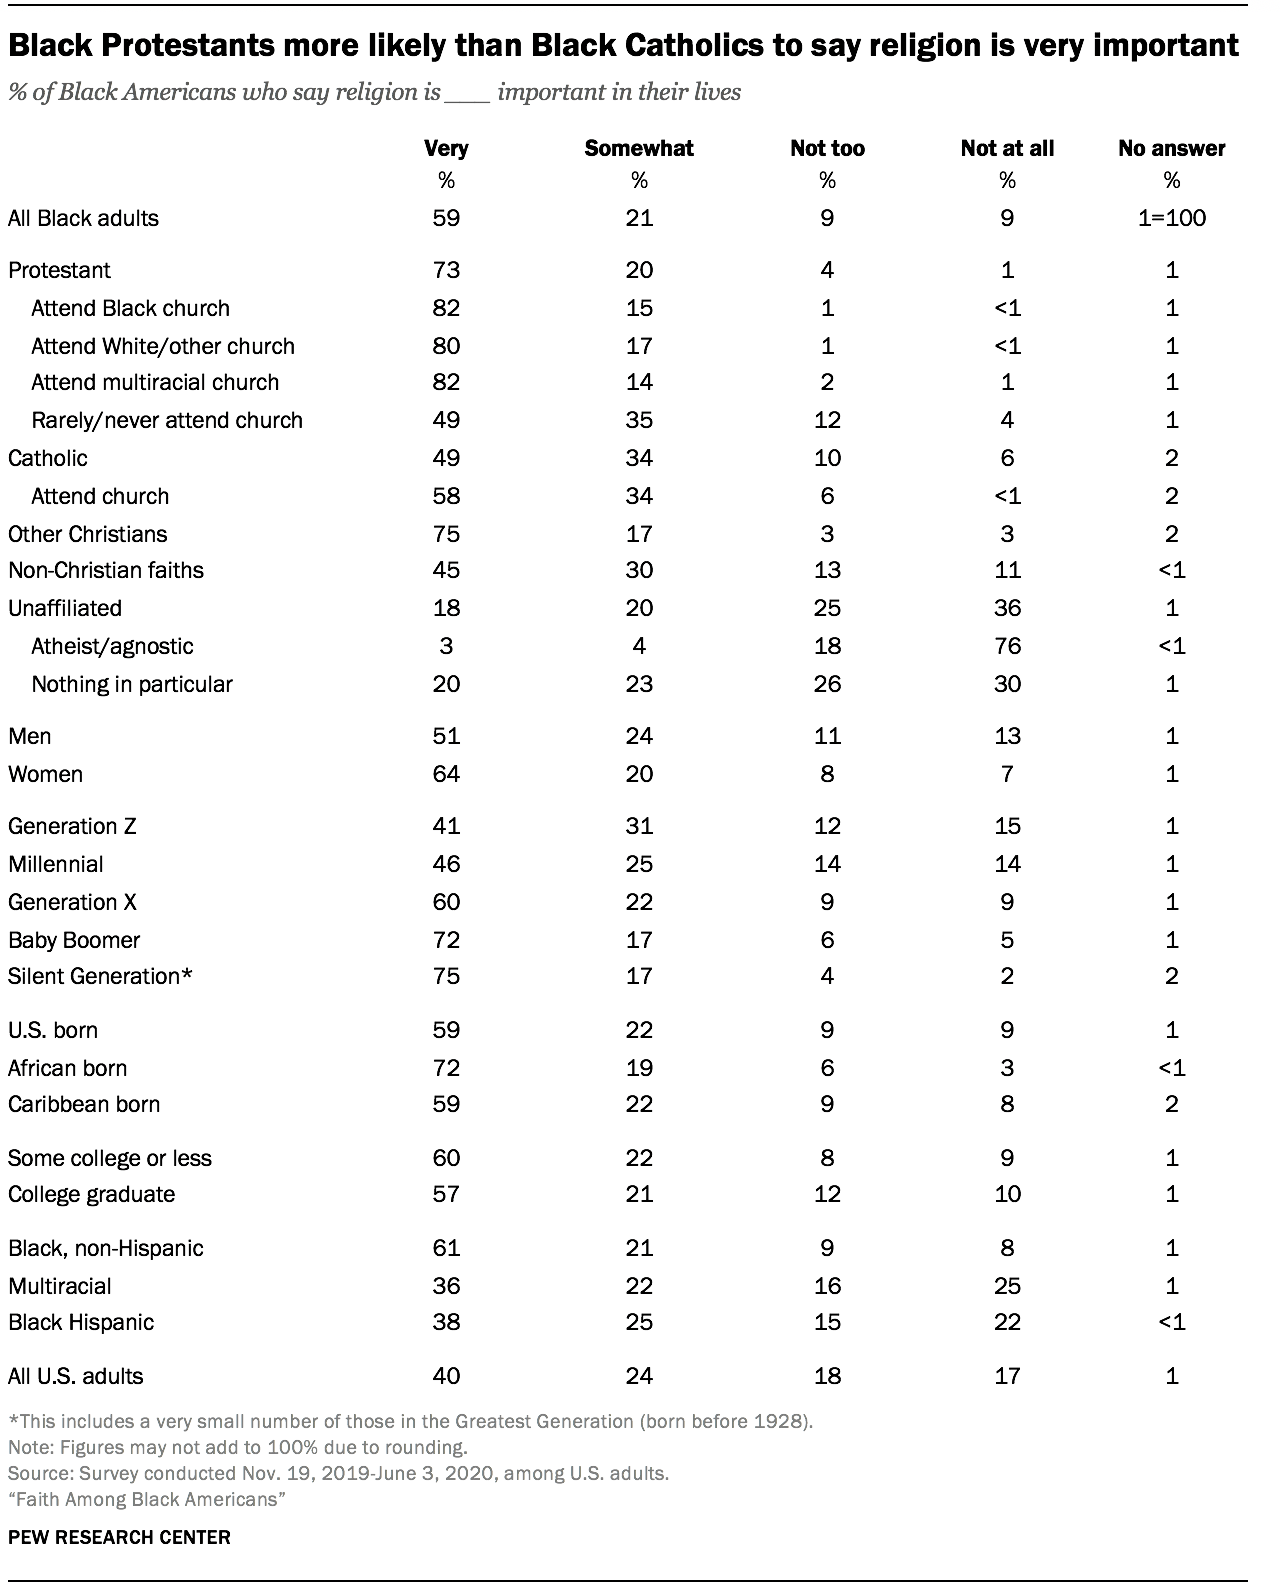 Black Protestants more likely than Black Catholics to say religion is very important